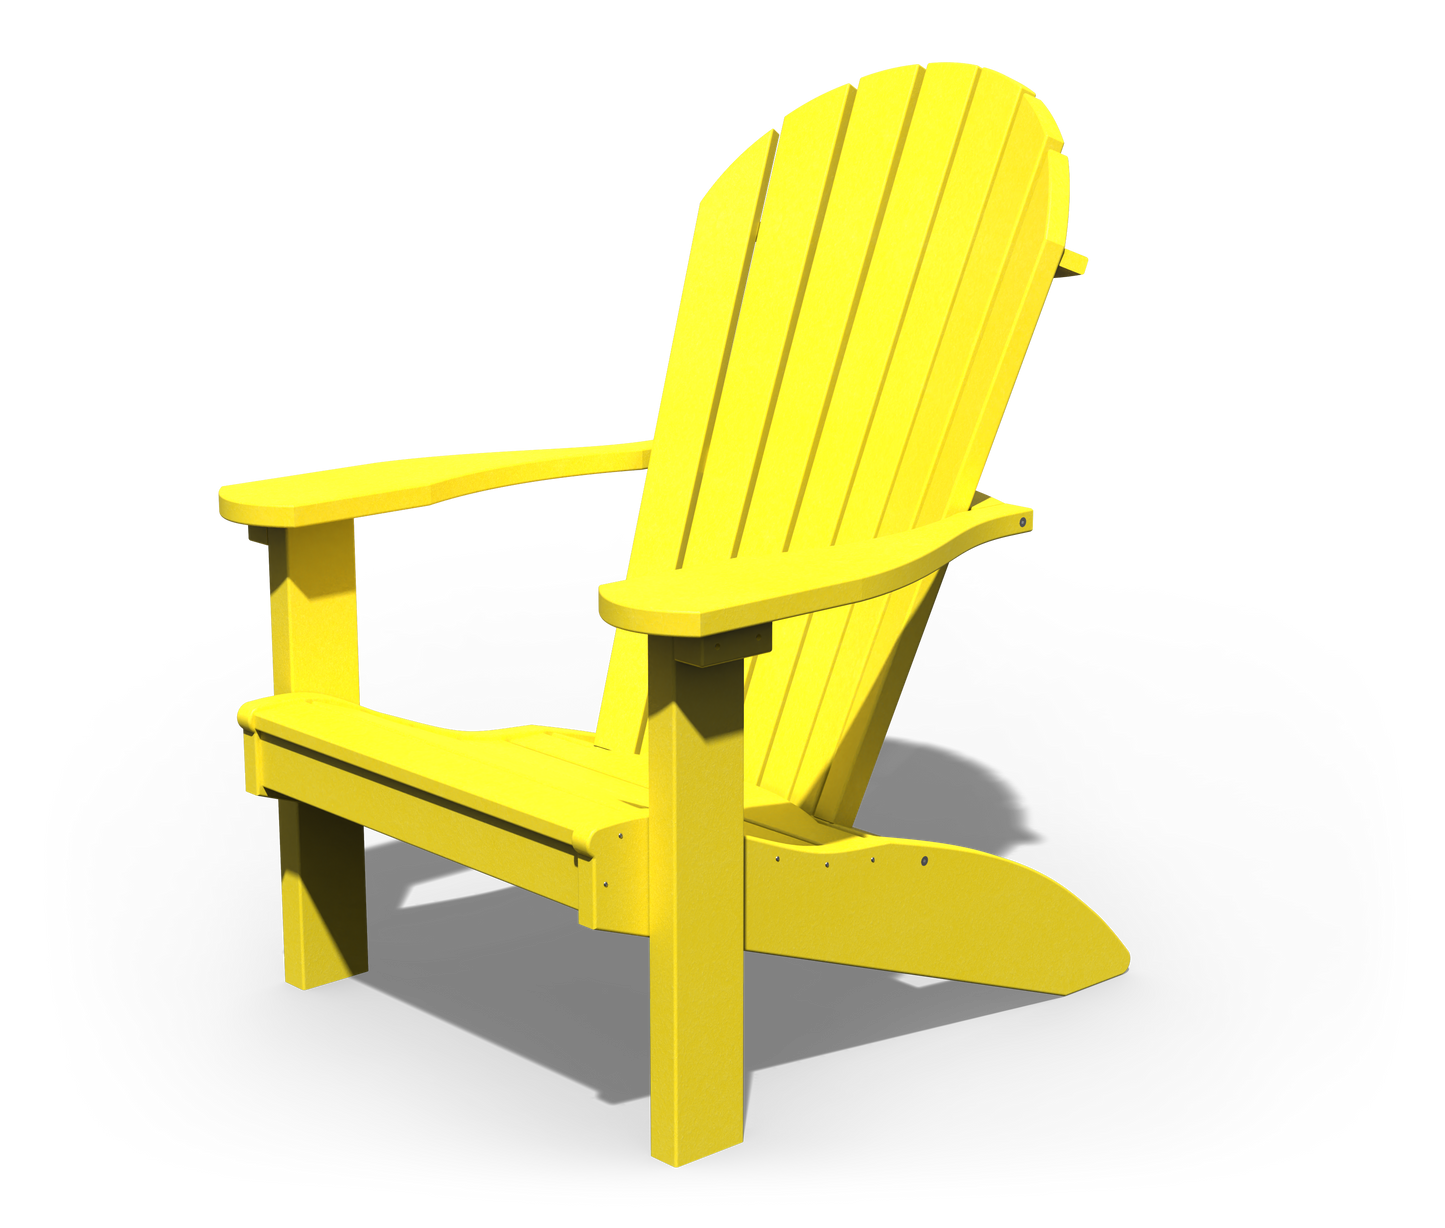 Patiova Recycled Plastic Amish Crafted Adirondack Chair - LEAD TIME TO SHIP 3 WEEKS